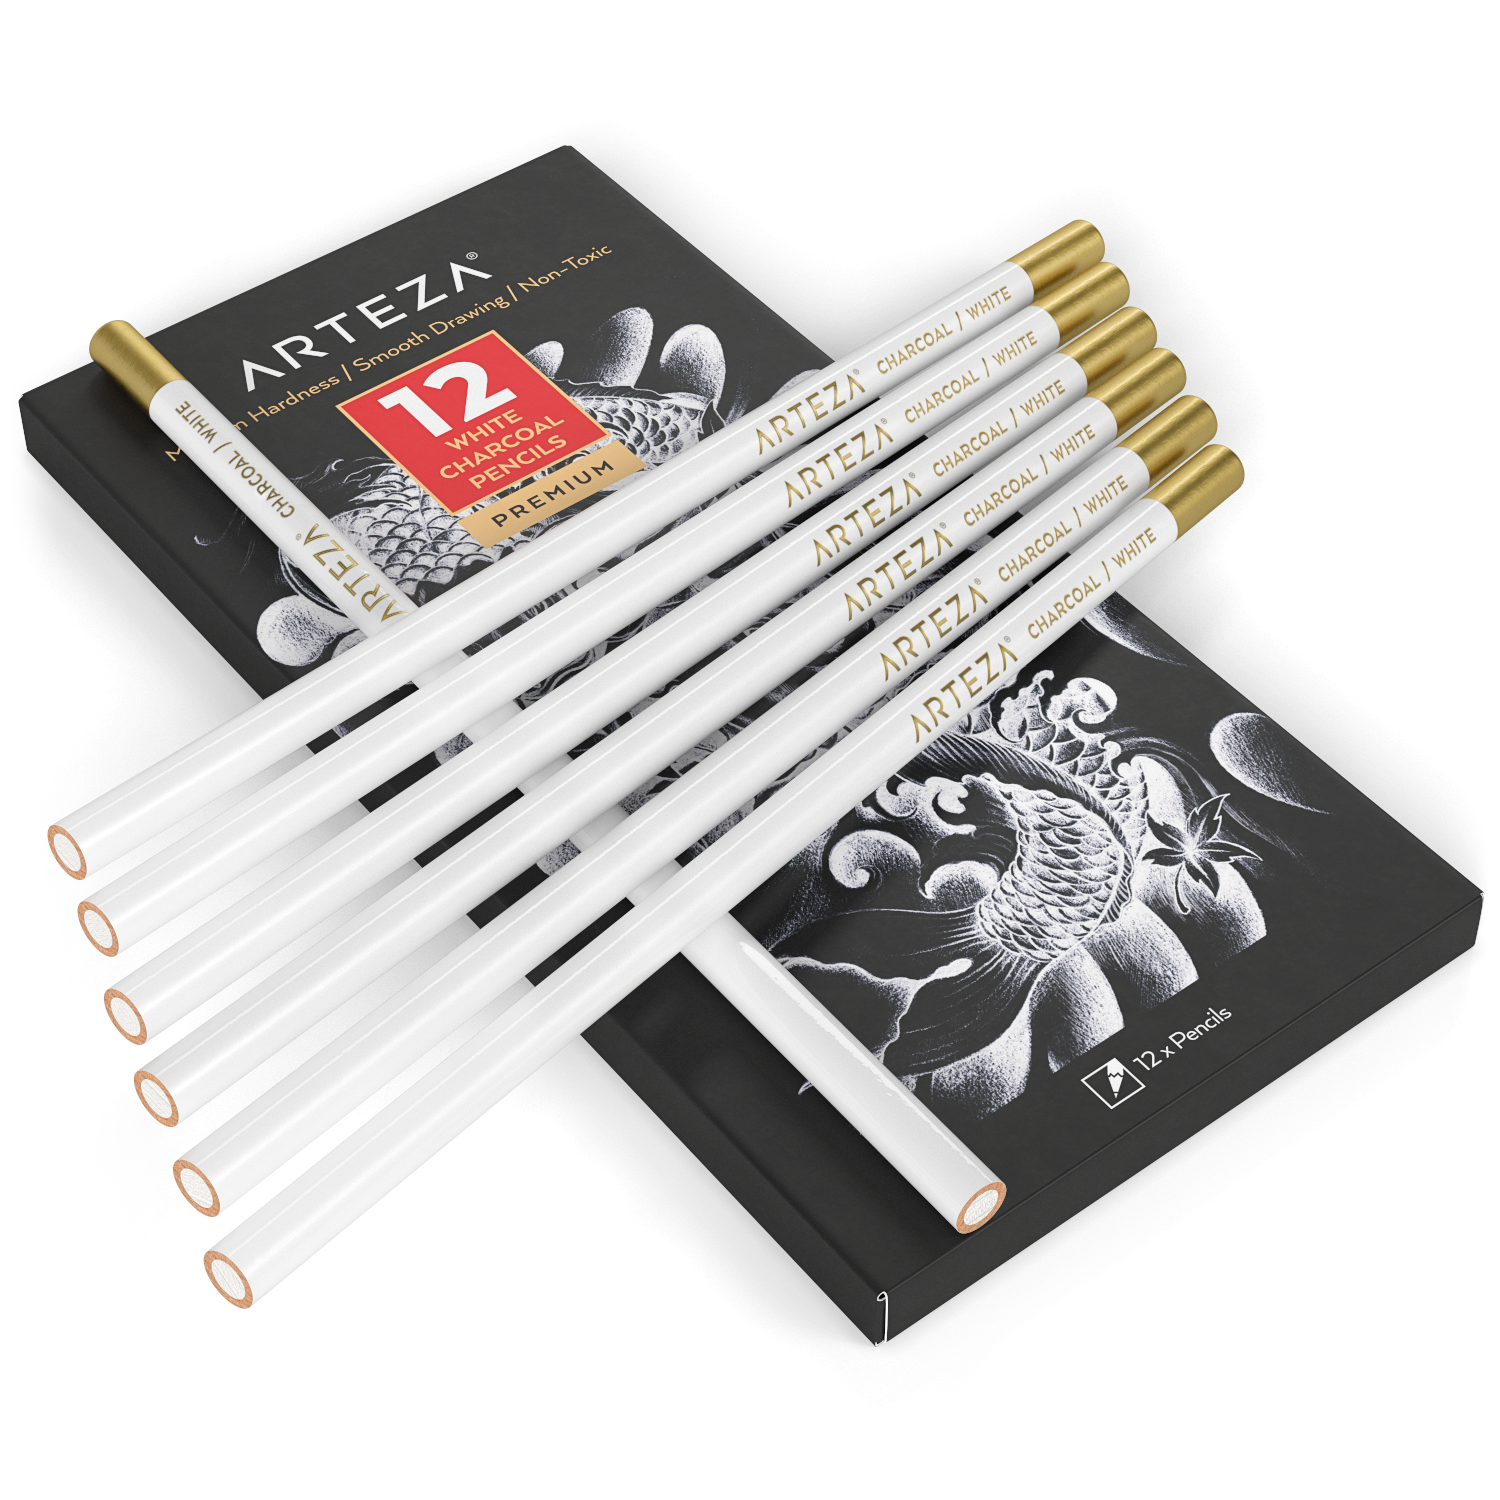 Master's Touch White Charcoal Pencils - 2 Piece Set